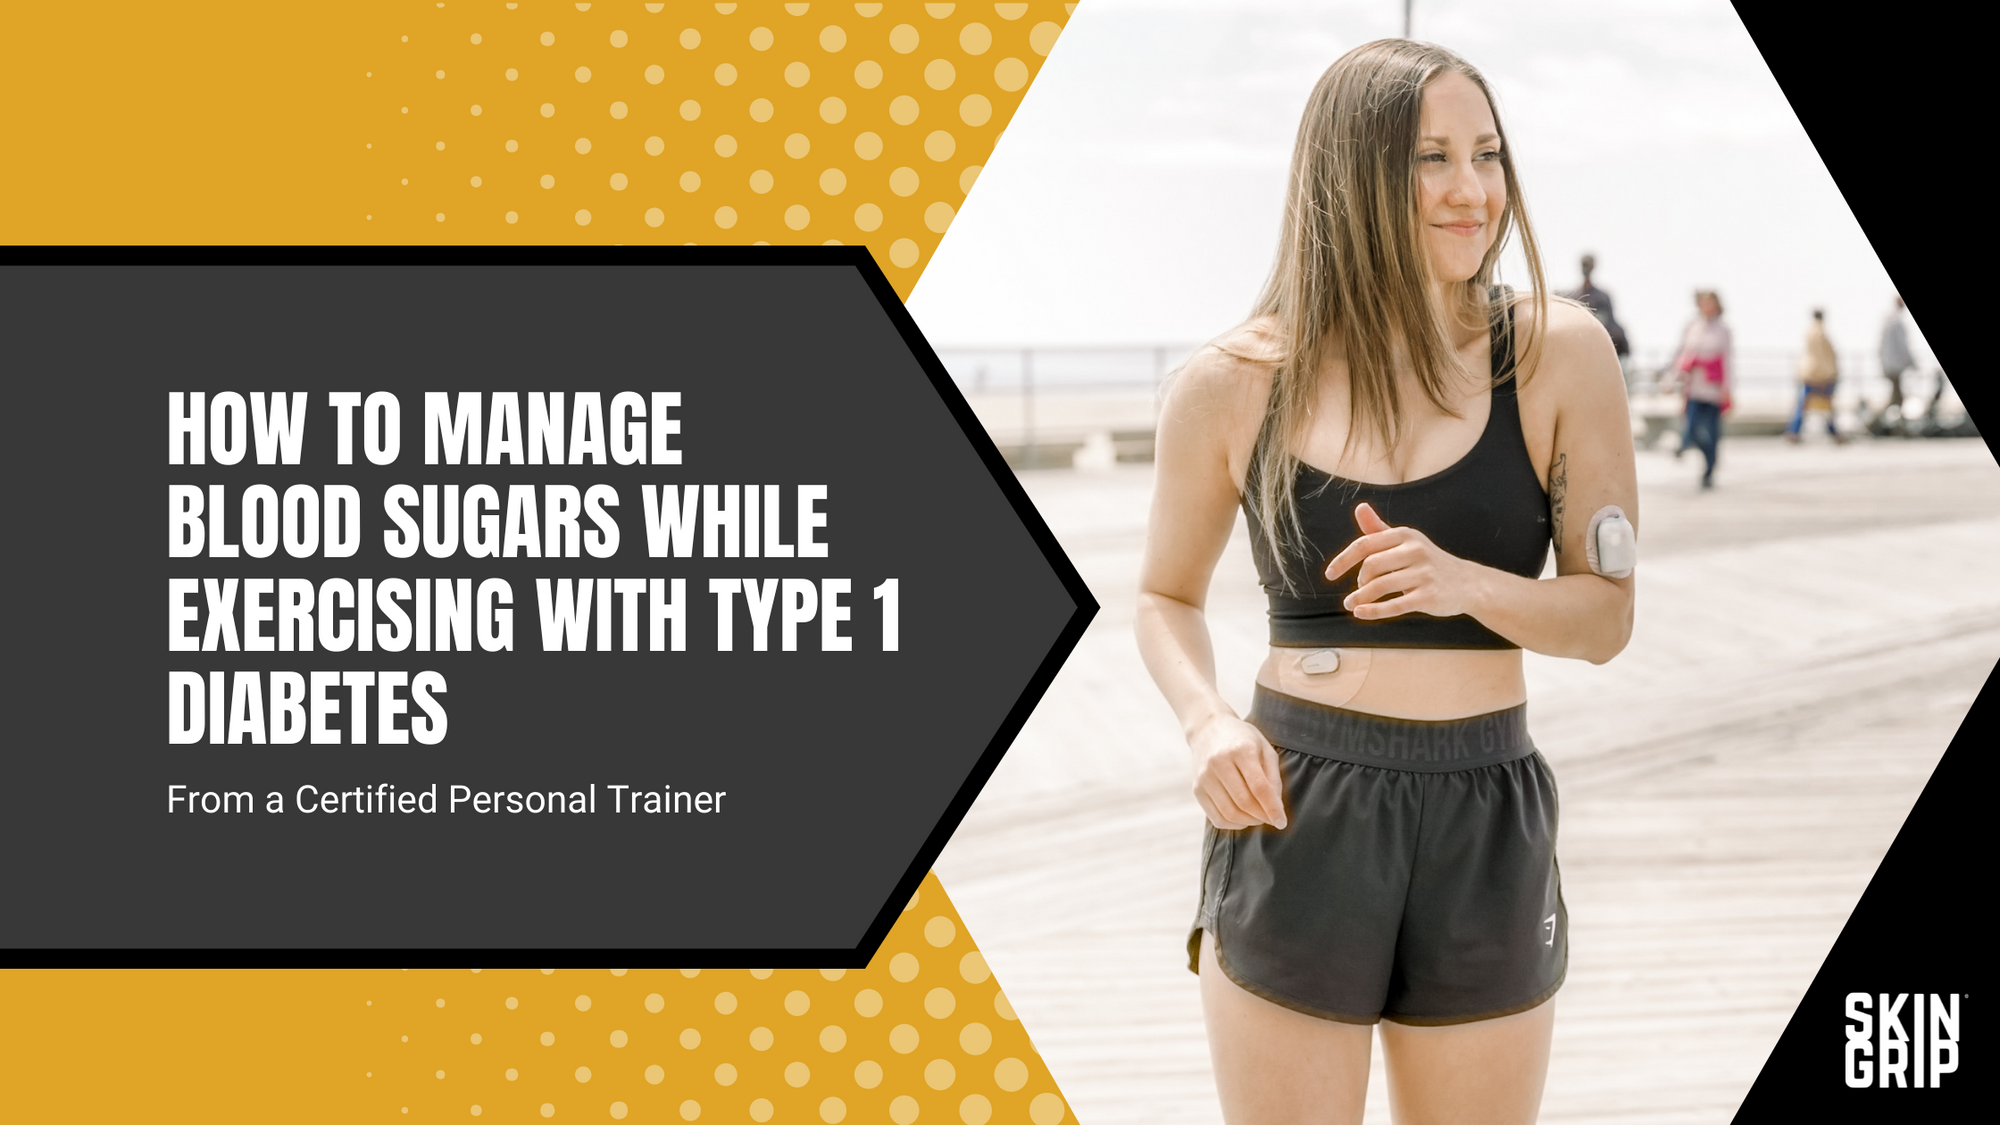 How to Manage Blood Sugars While Exercising with Type 1 Diabetes from a Certified Personal Trainer 